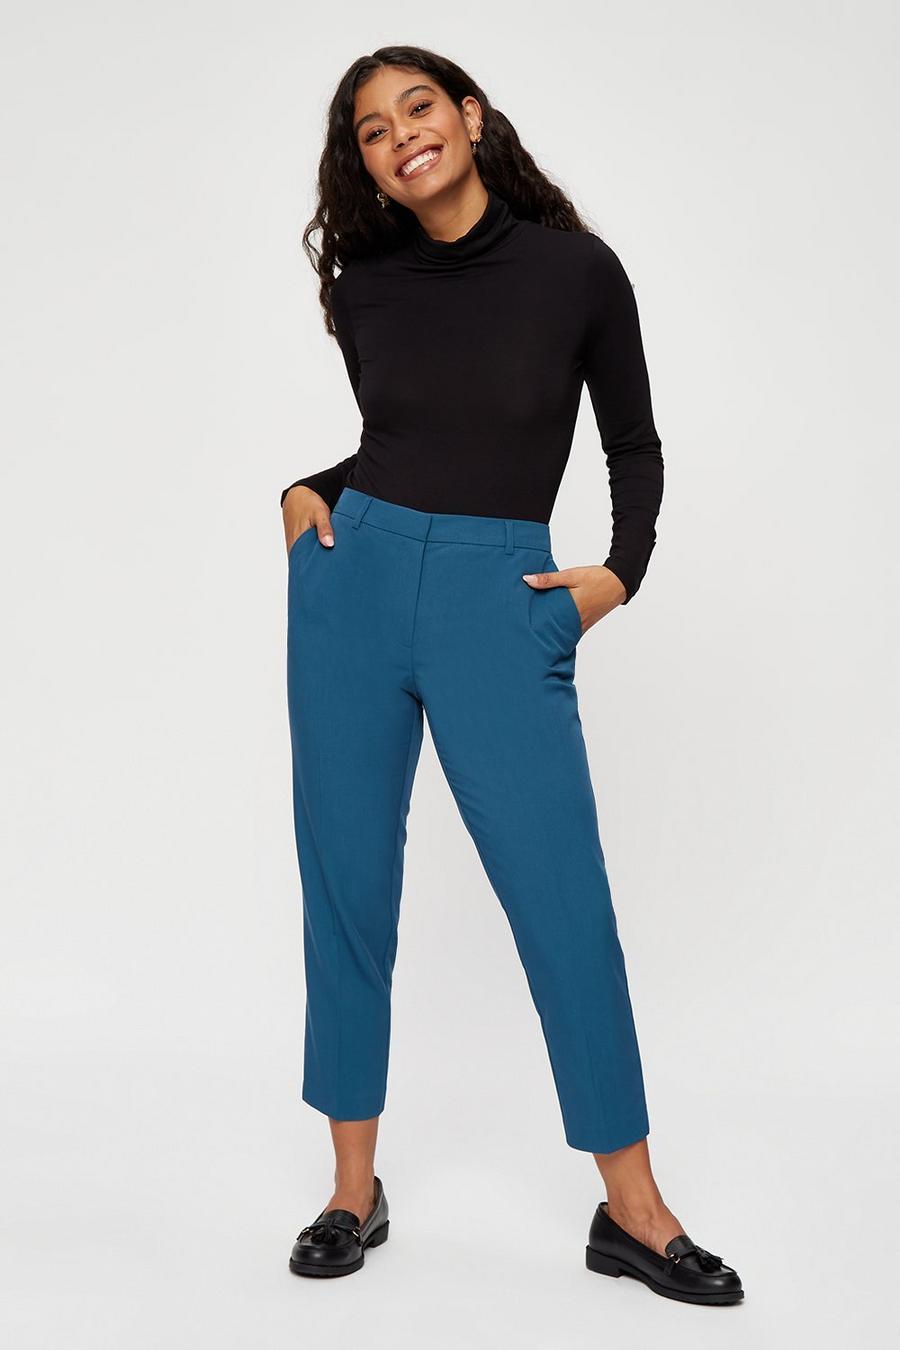 Petite Teal Ankle Grazer Trousers